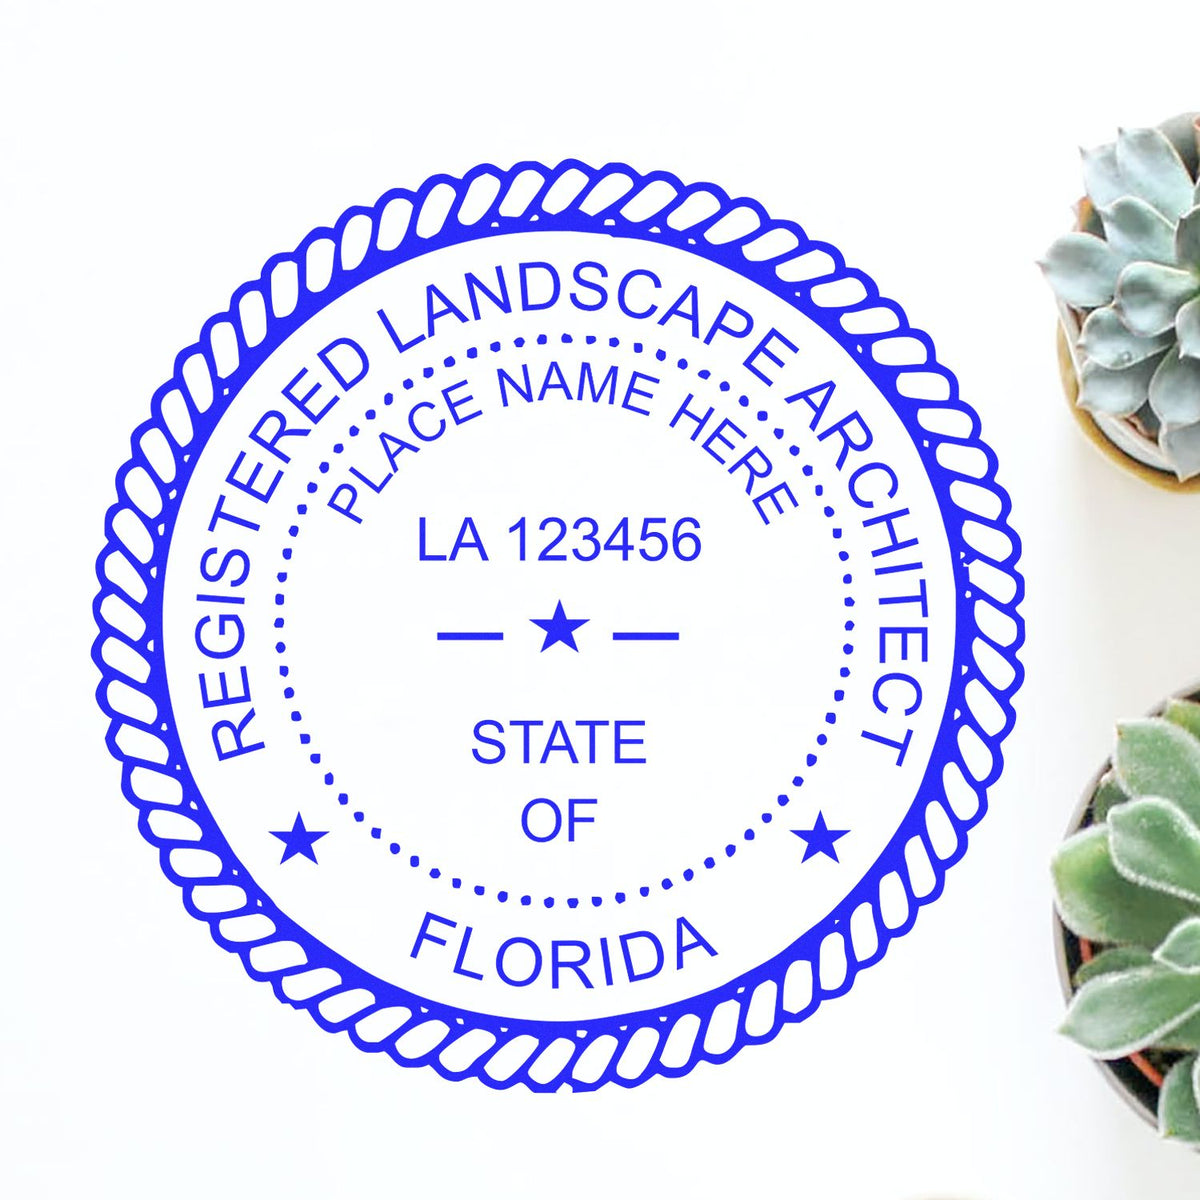 The Slim Pre-Inked Florida Landscape Architect Seal Stamp stamp impression comes to life with a crisp, detailed photo on paper - showcasing true professional quality.